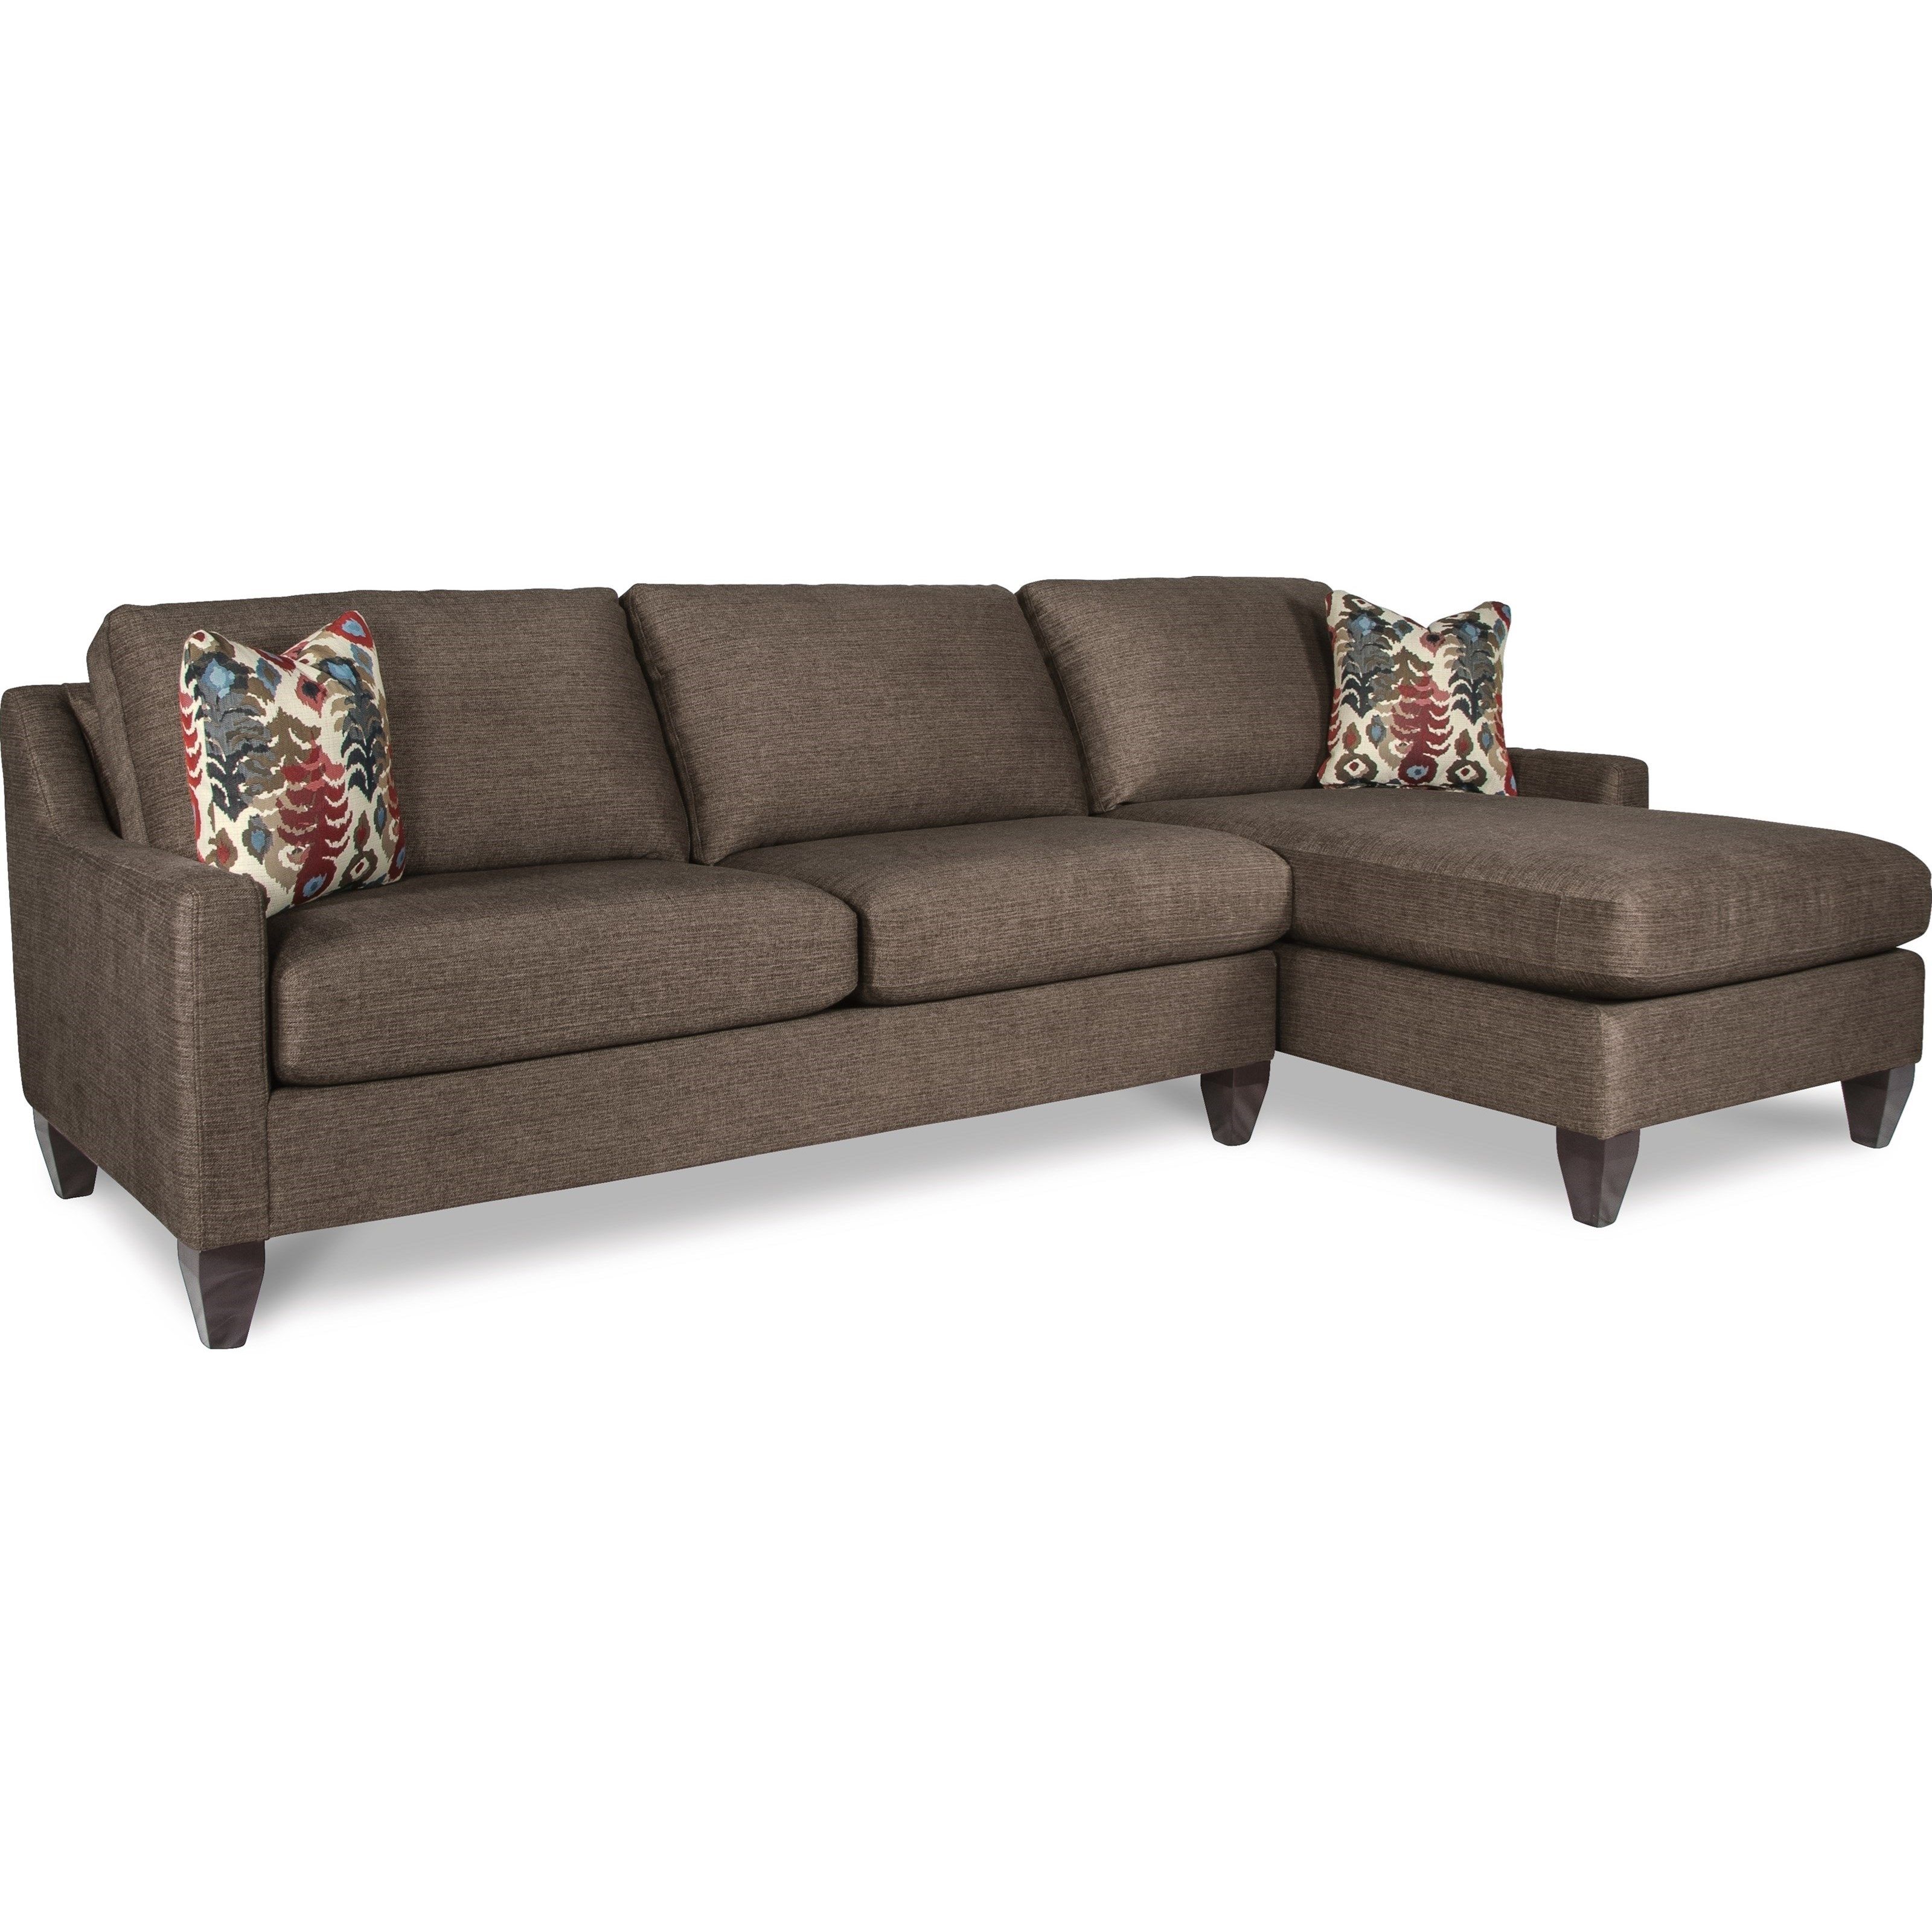 Raf Chaise Laf Sofa | Baci Living Room For Mcdade Graphite 2 Piece Sectionals With Laf Chaise (View 12 of 30)